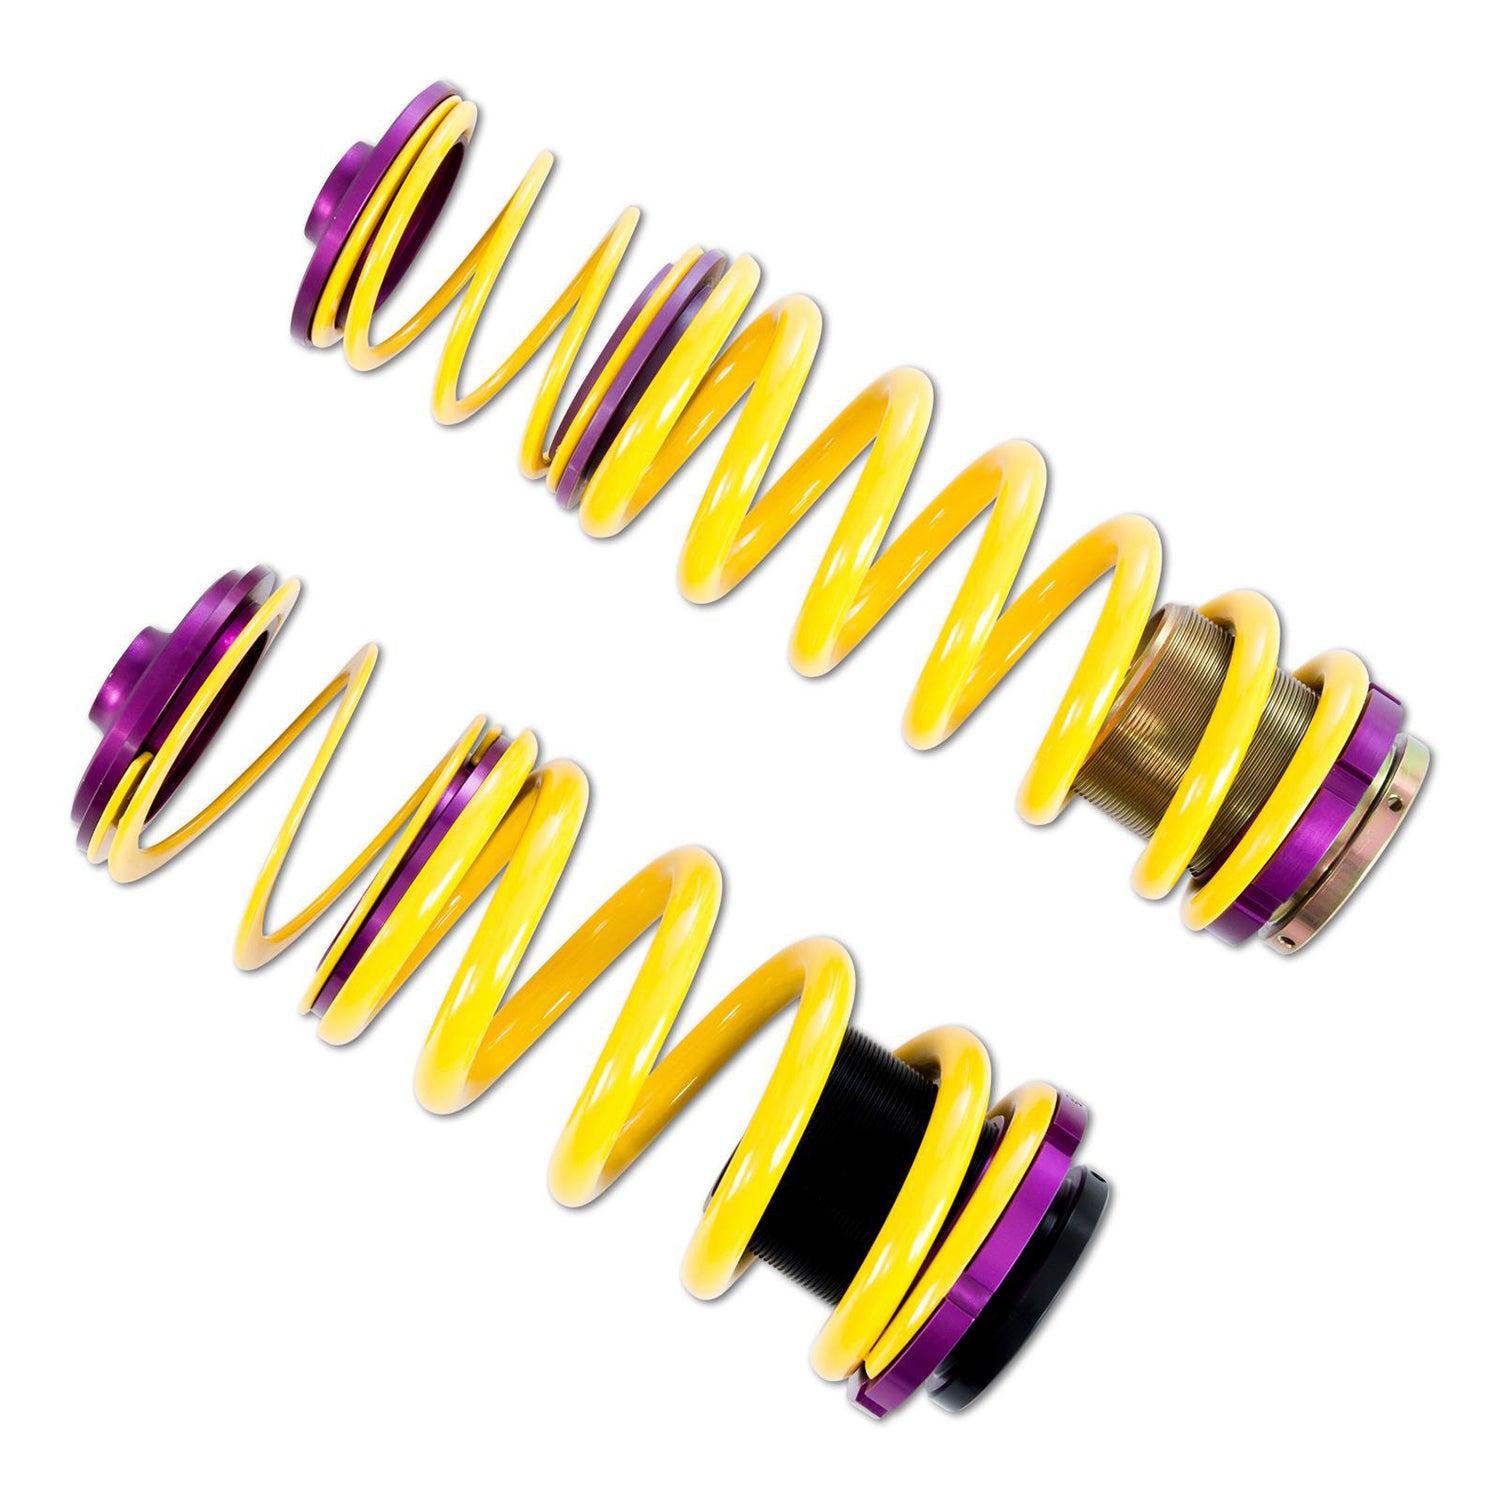 KW Mercedes C-Class Height Adjustable Lowering Spring Kit (205) With EDC-R44 Performance